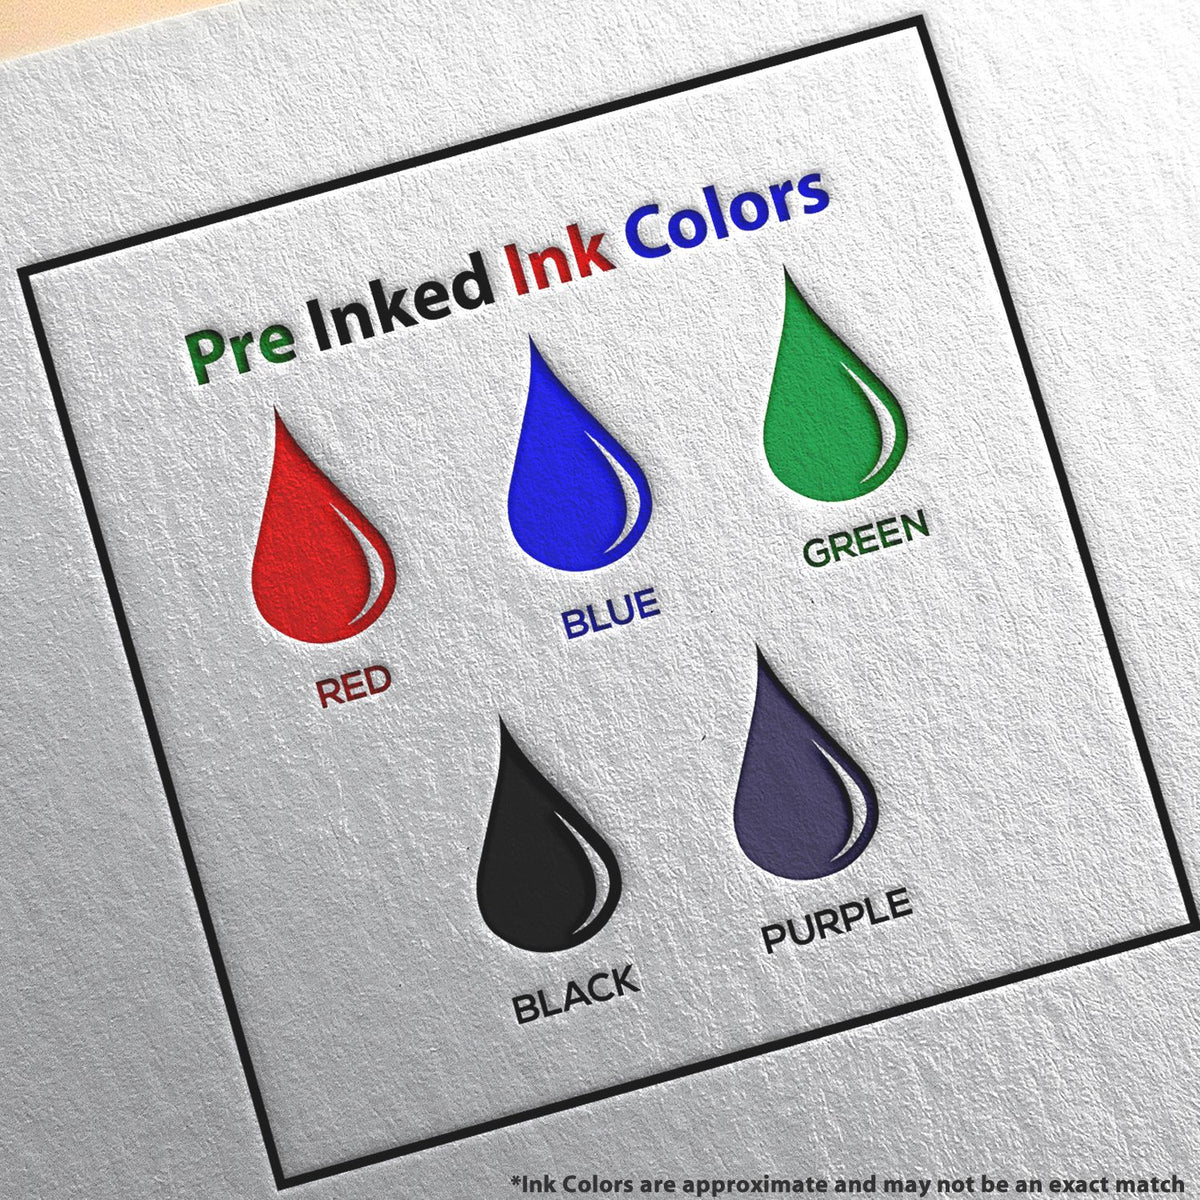 A picture showing the different ink colors or hues available for the Premium MaxLight Pre-Inked Vermont Landscape Architectural Stamp product.